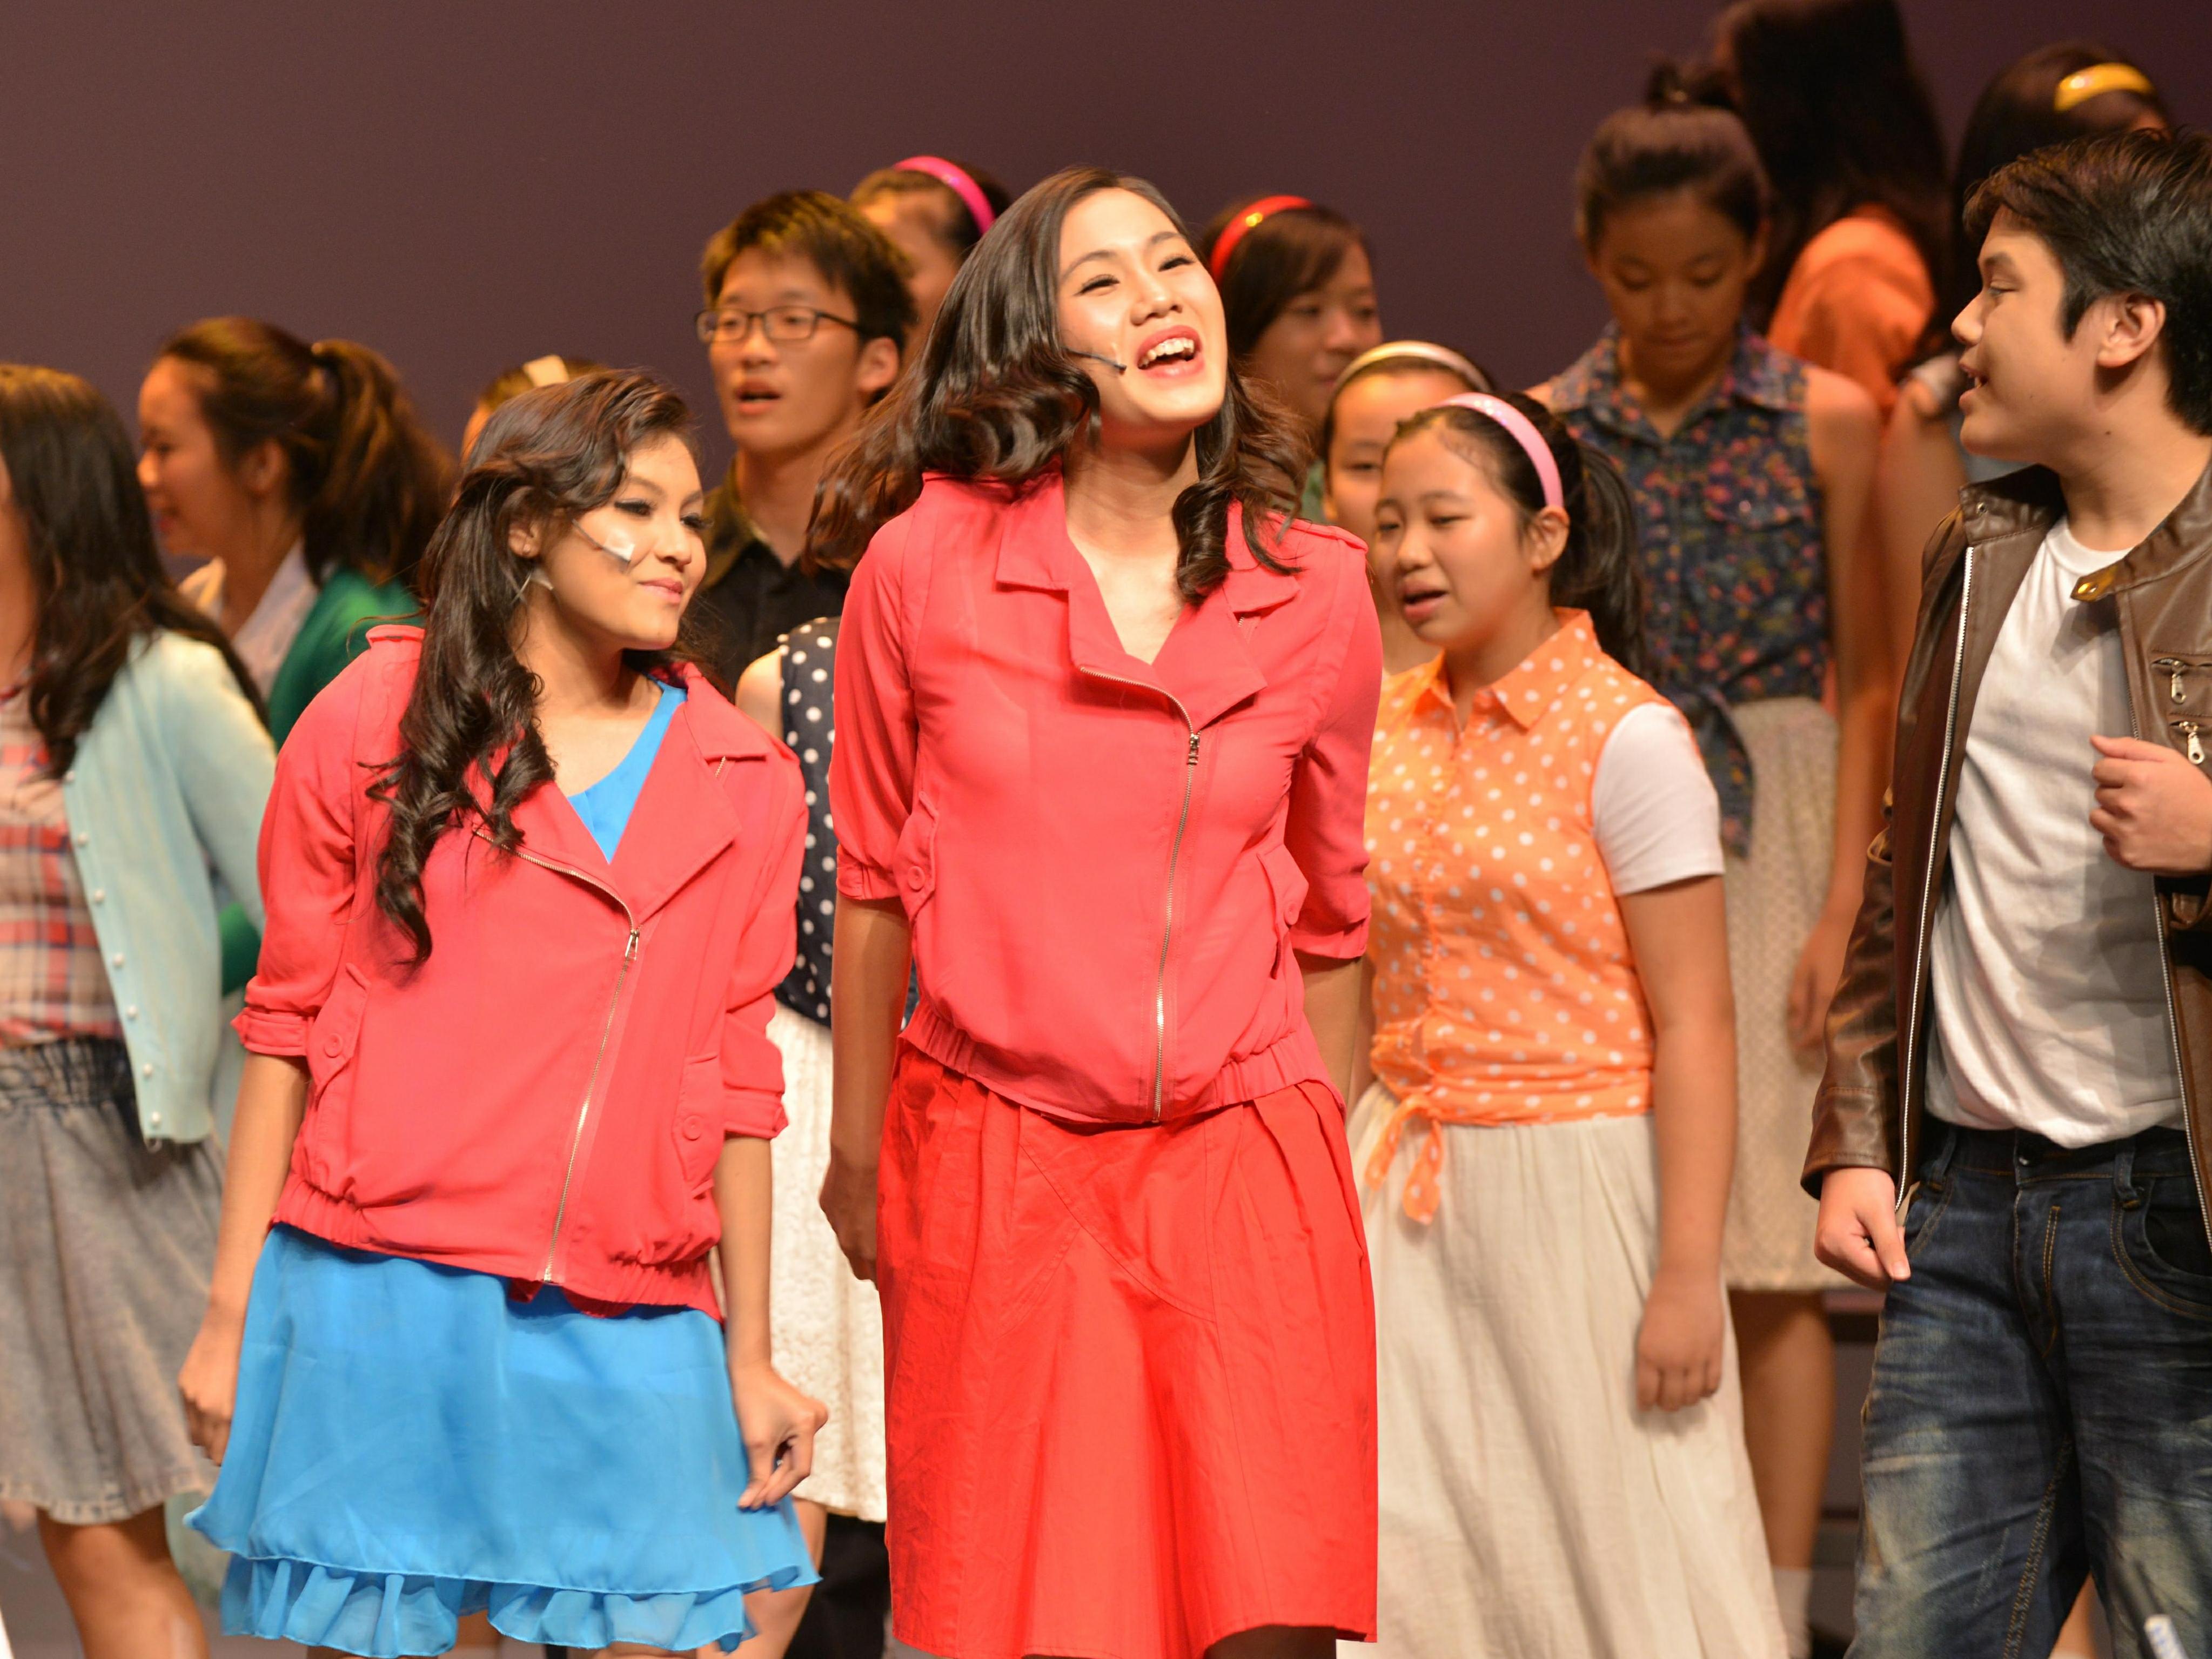 Musical - Grease